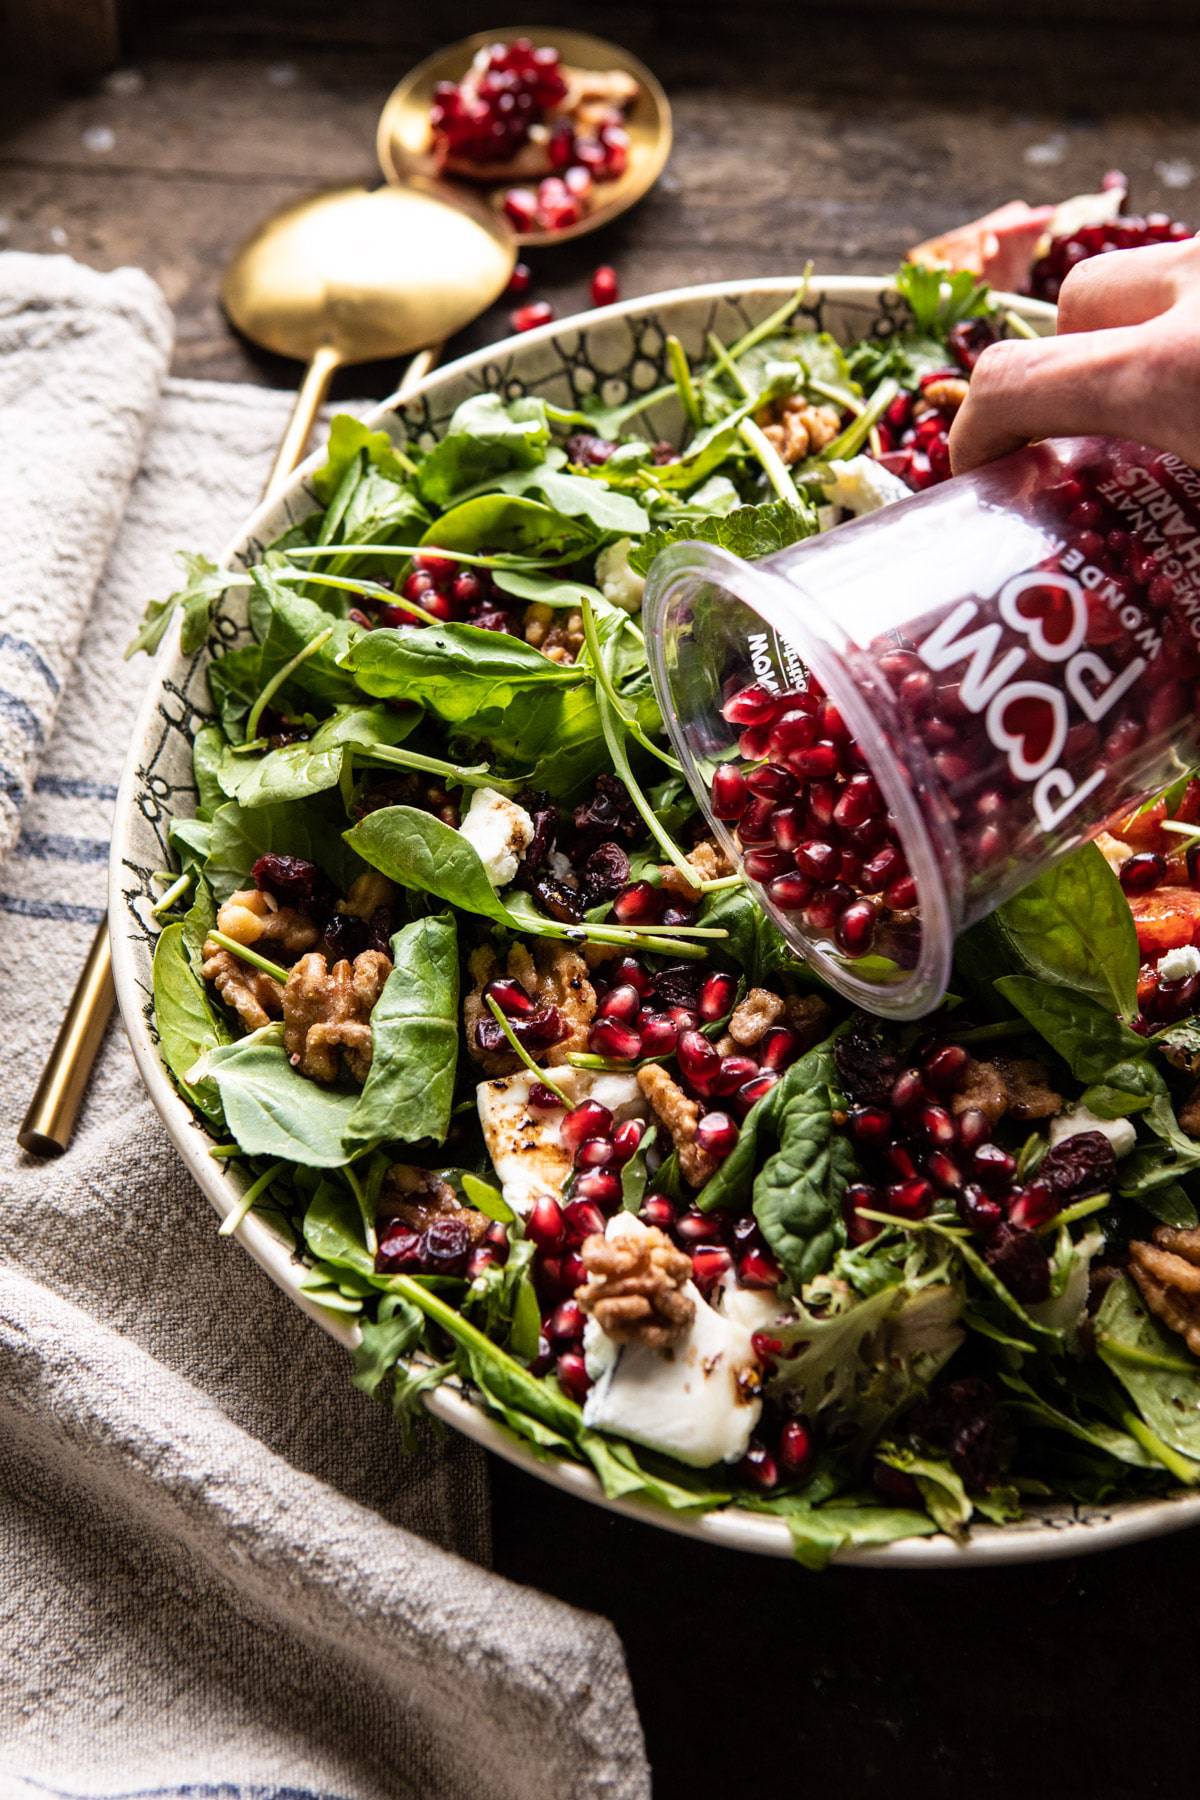 Winter-Pomegranate-Salad-with-Maple-Candied-Walnuts-4.jpg